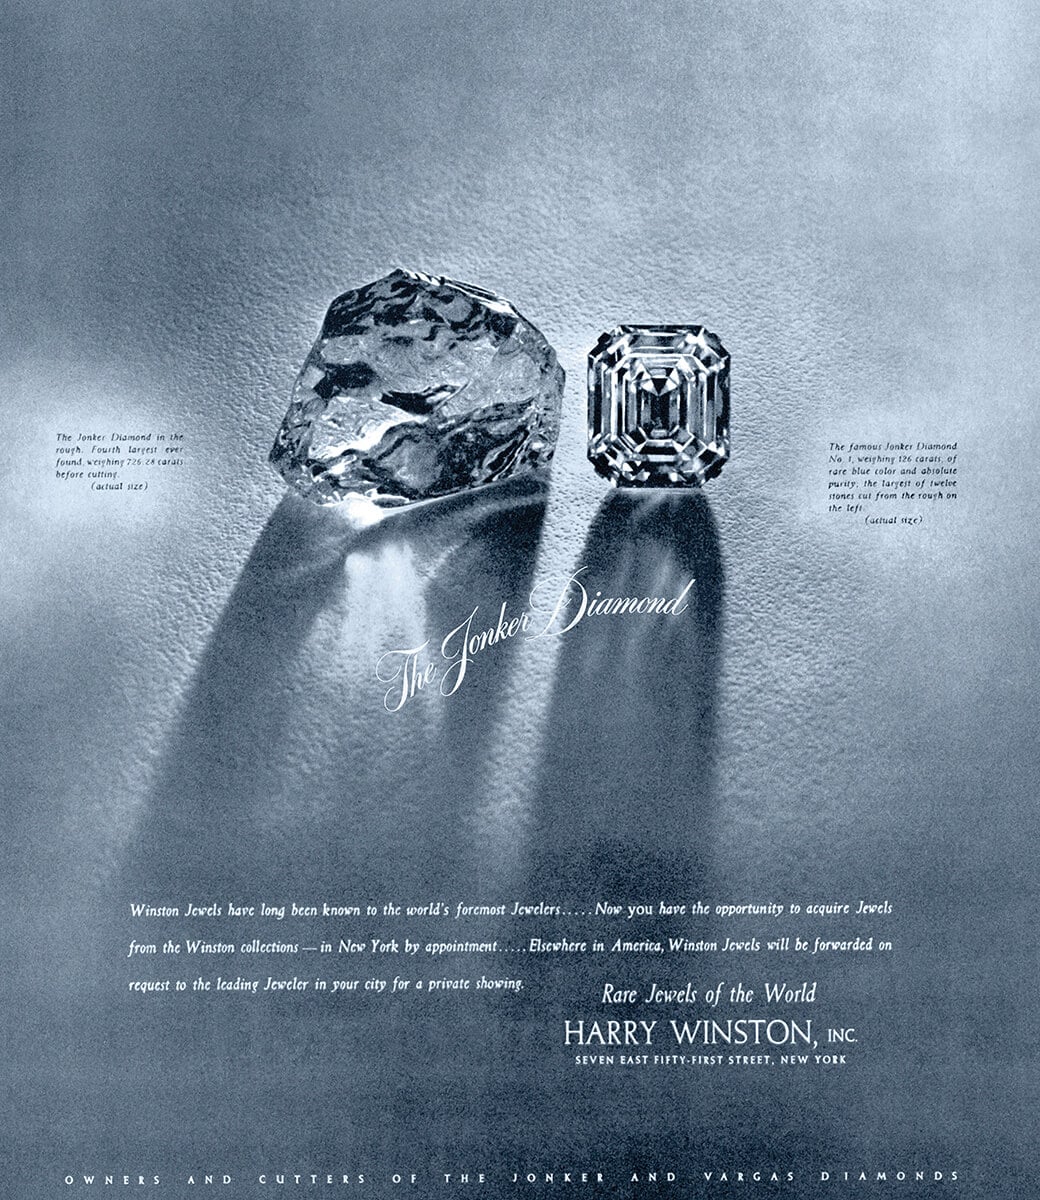 Vintage Harry Winston advertising with side-by-side images of the Jonker diamond rough next to one of it's largest cut stones 